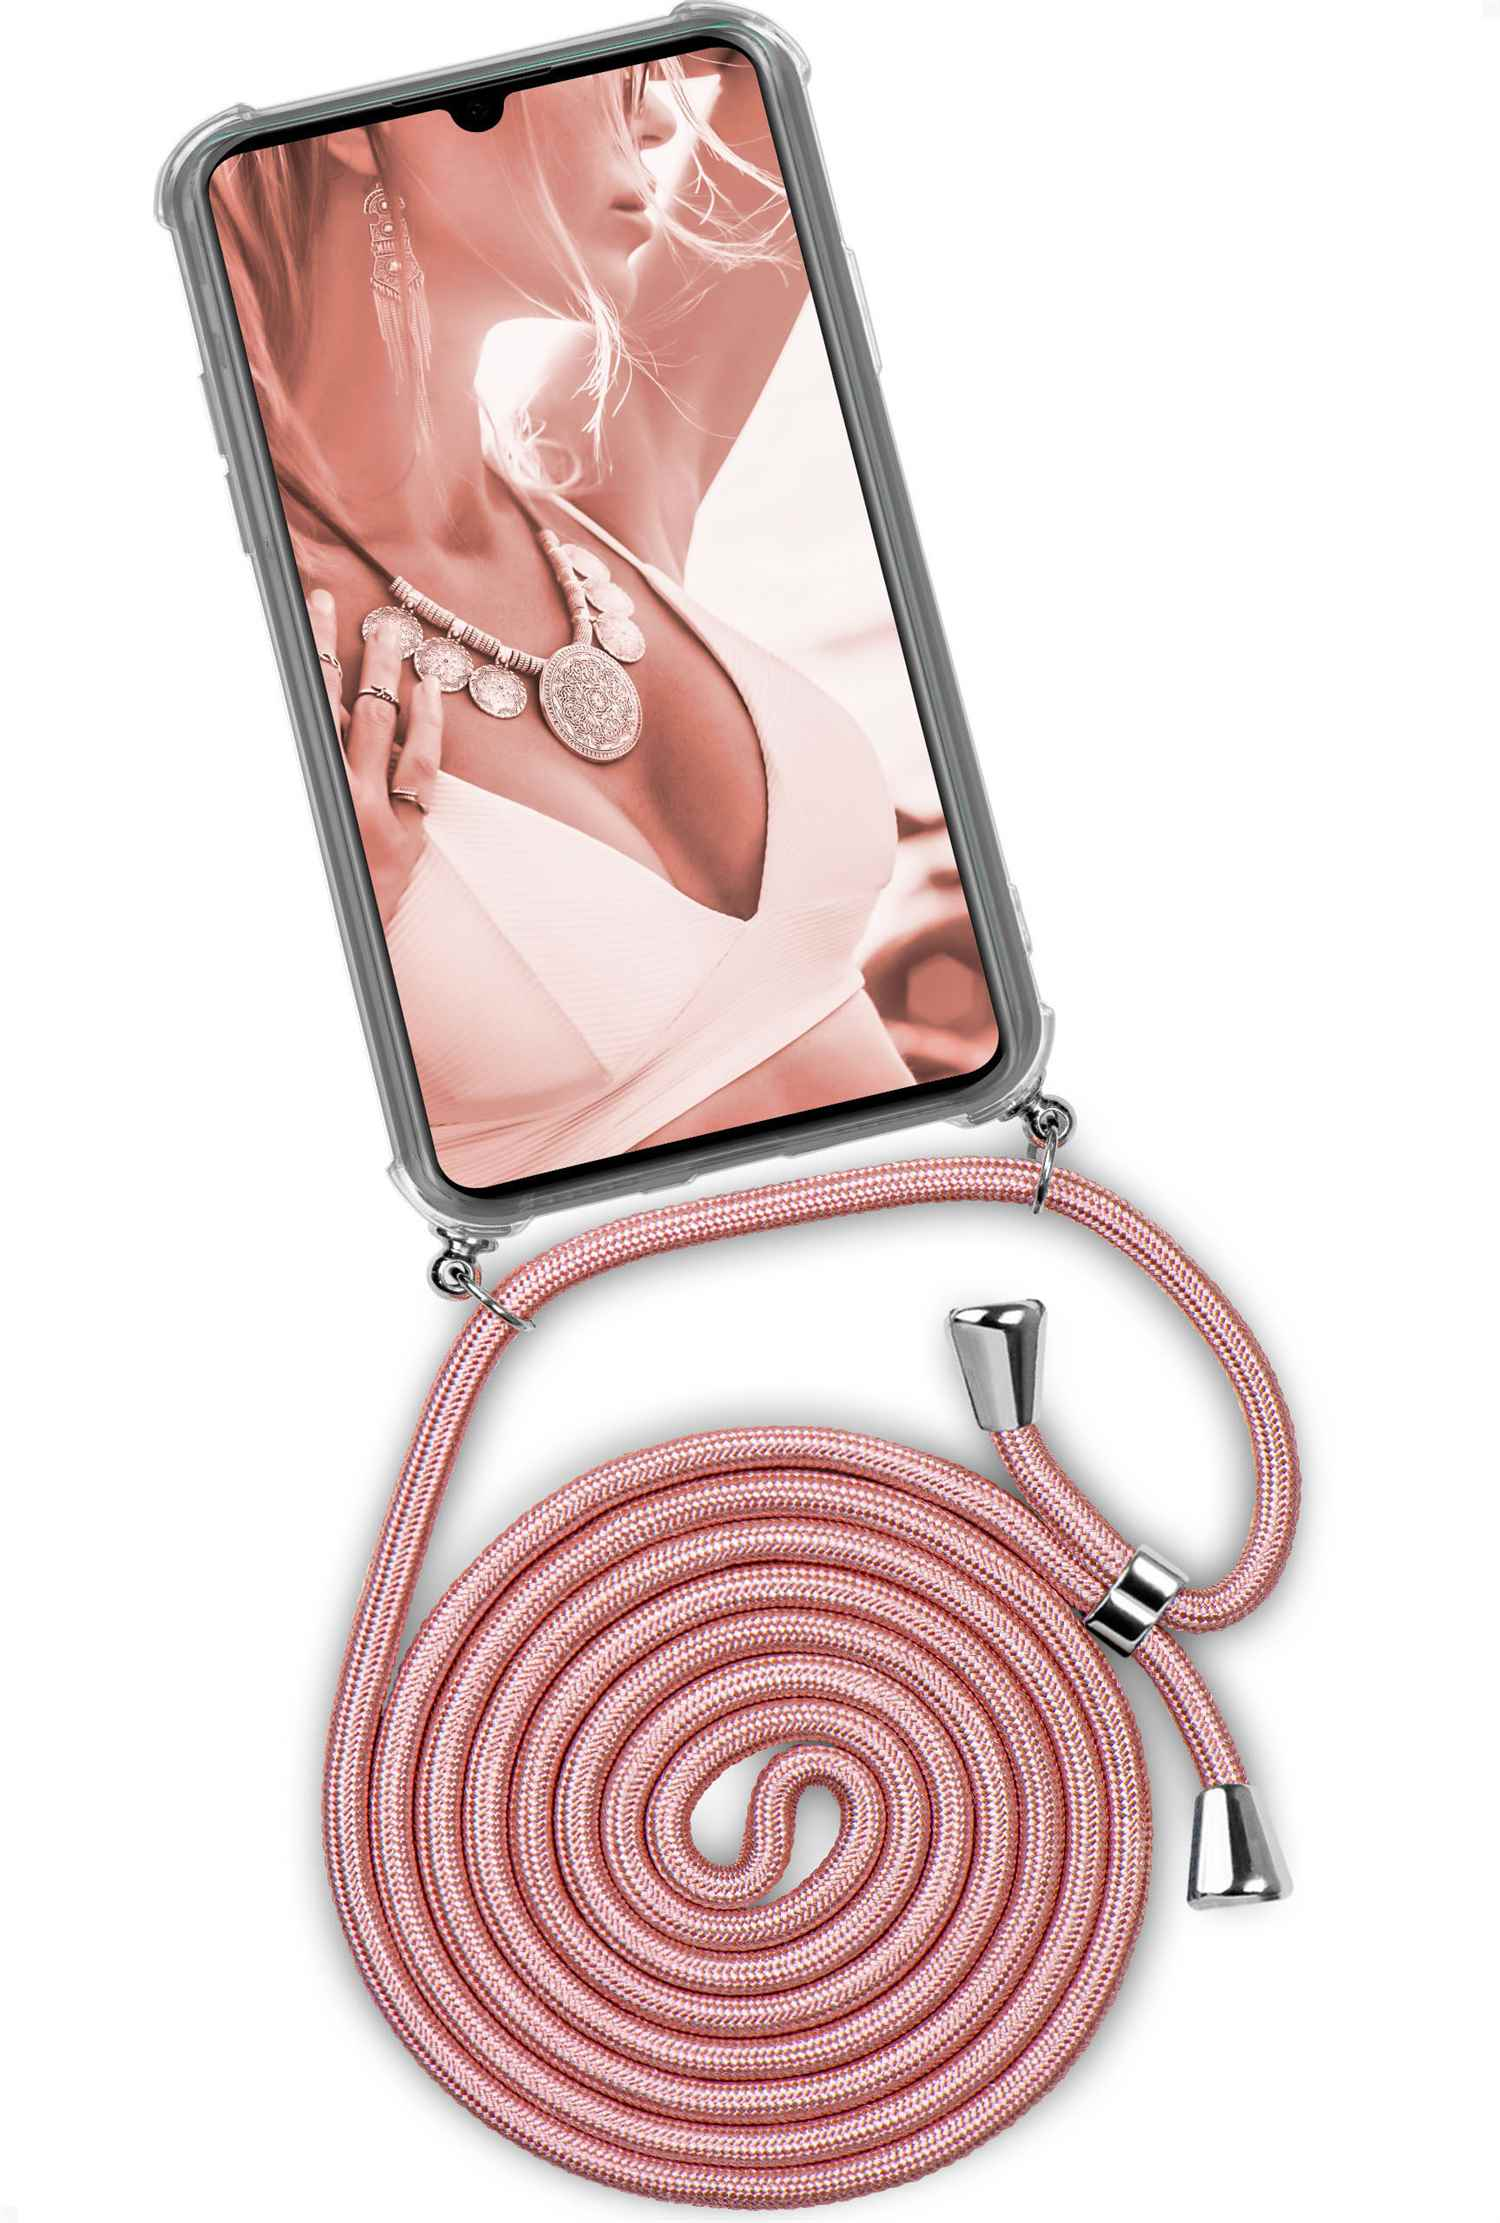 ONEFLOW (Silber) Twist Case, P30 Edition, Lite New Huawei, Shiny Blush Backcover,